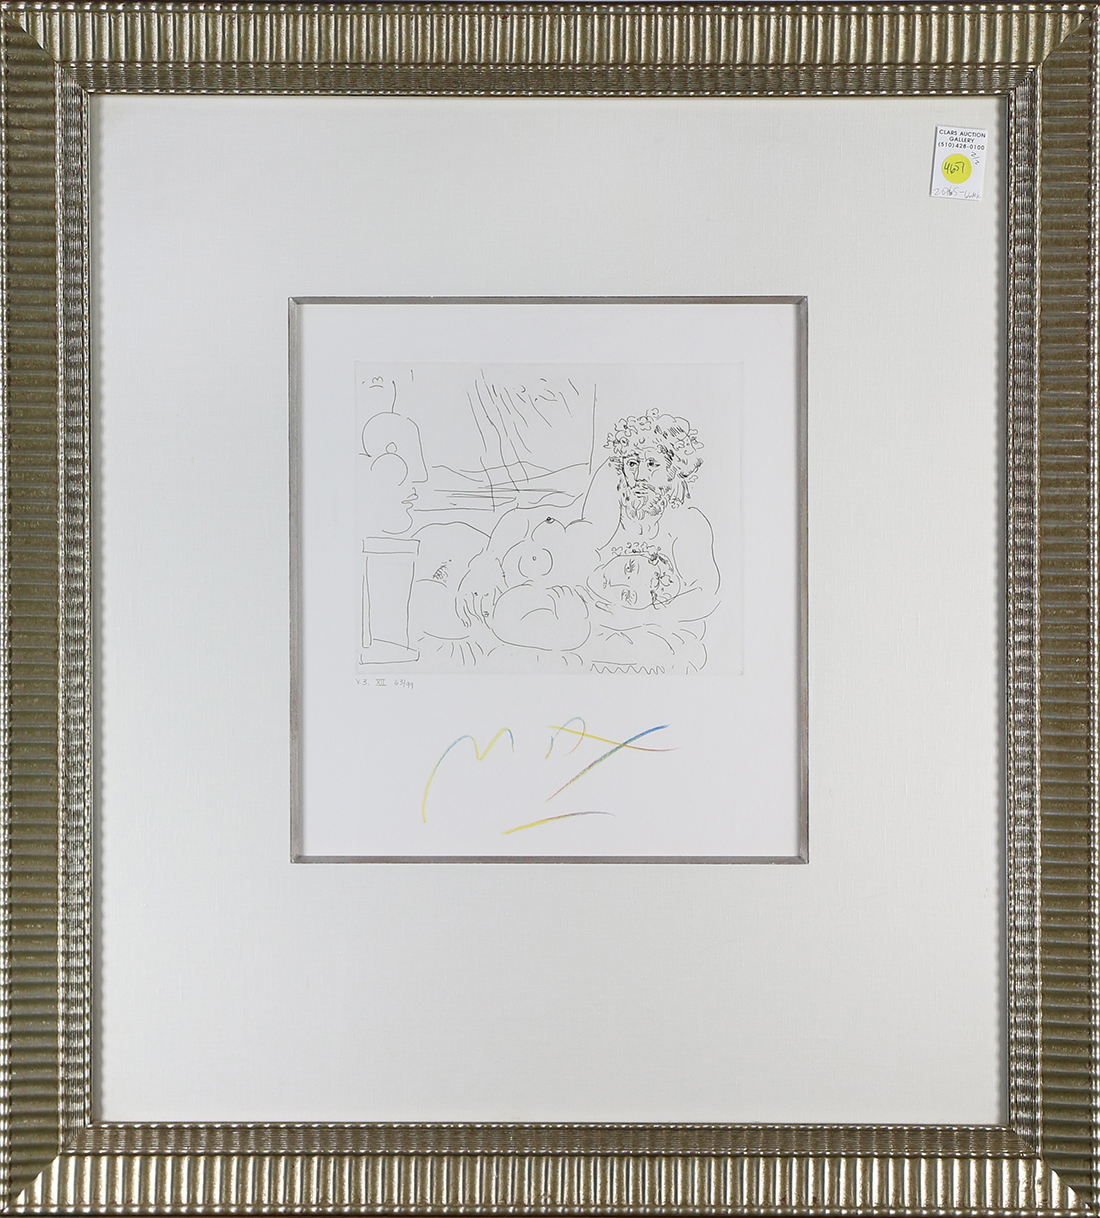 (lot of 2) Peter Max (America/German, b. 1937), "V.3 IX" and "V.3 XII," etchings, each color